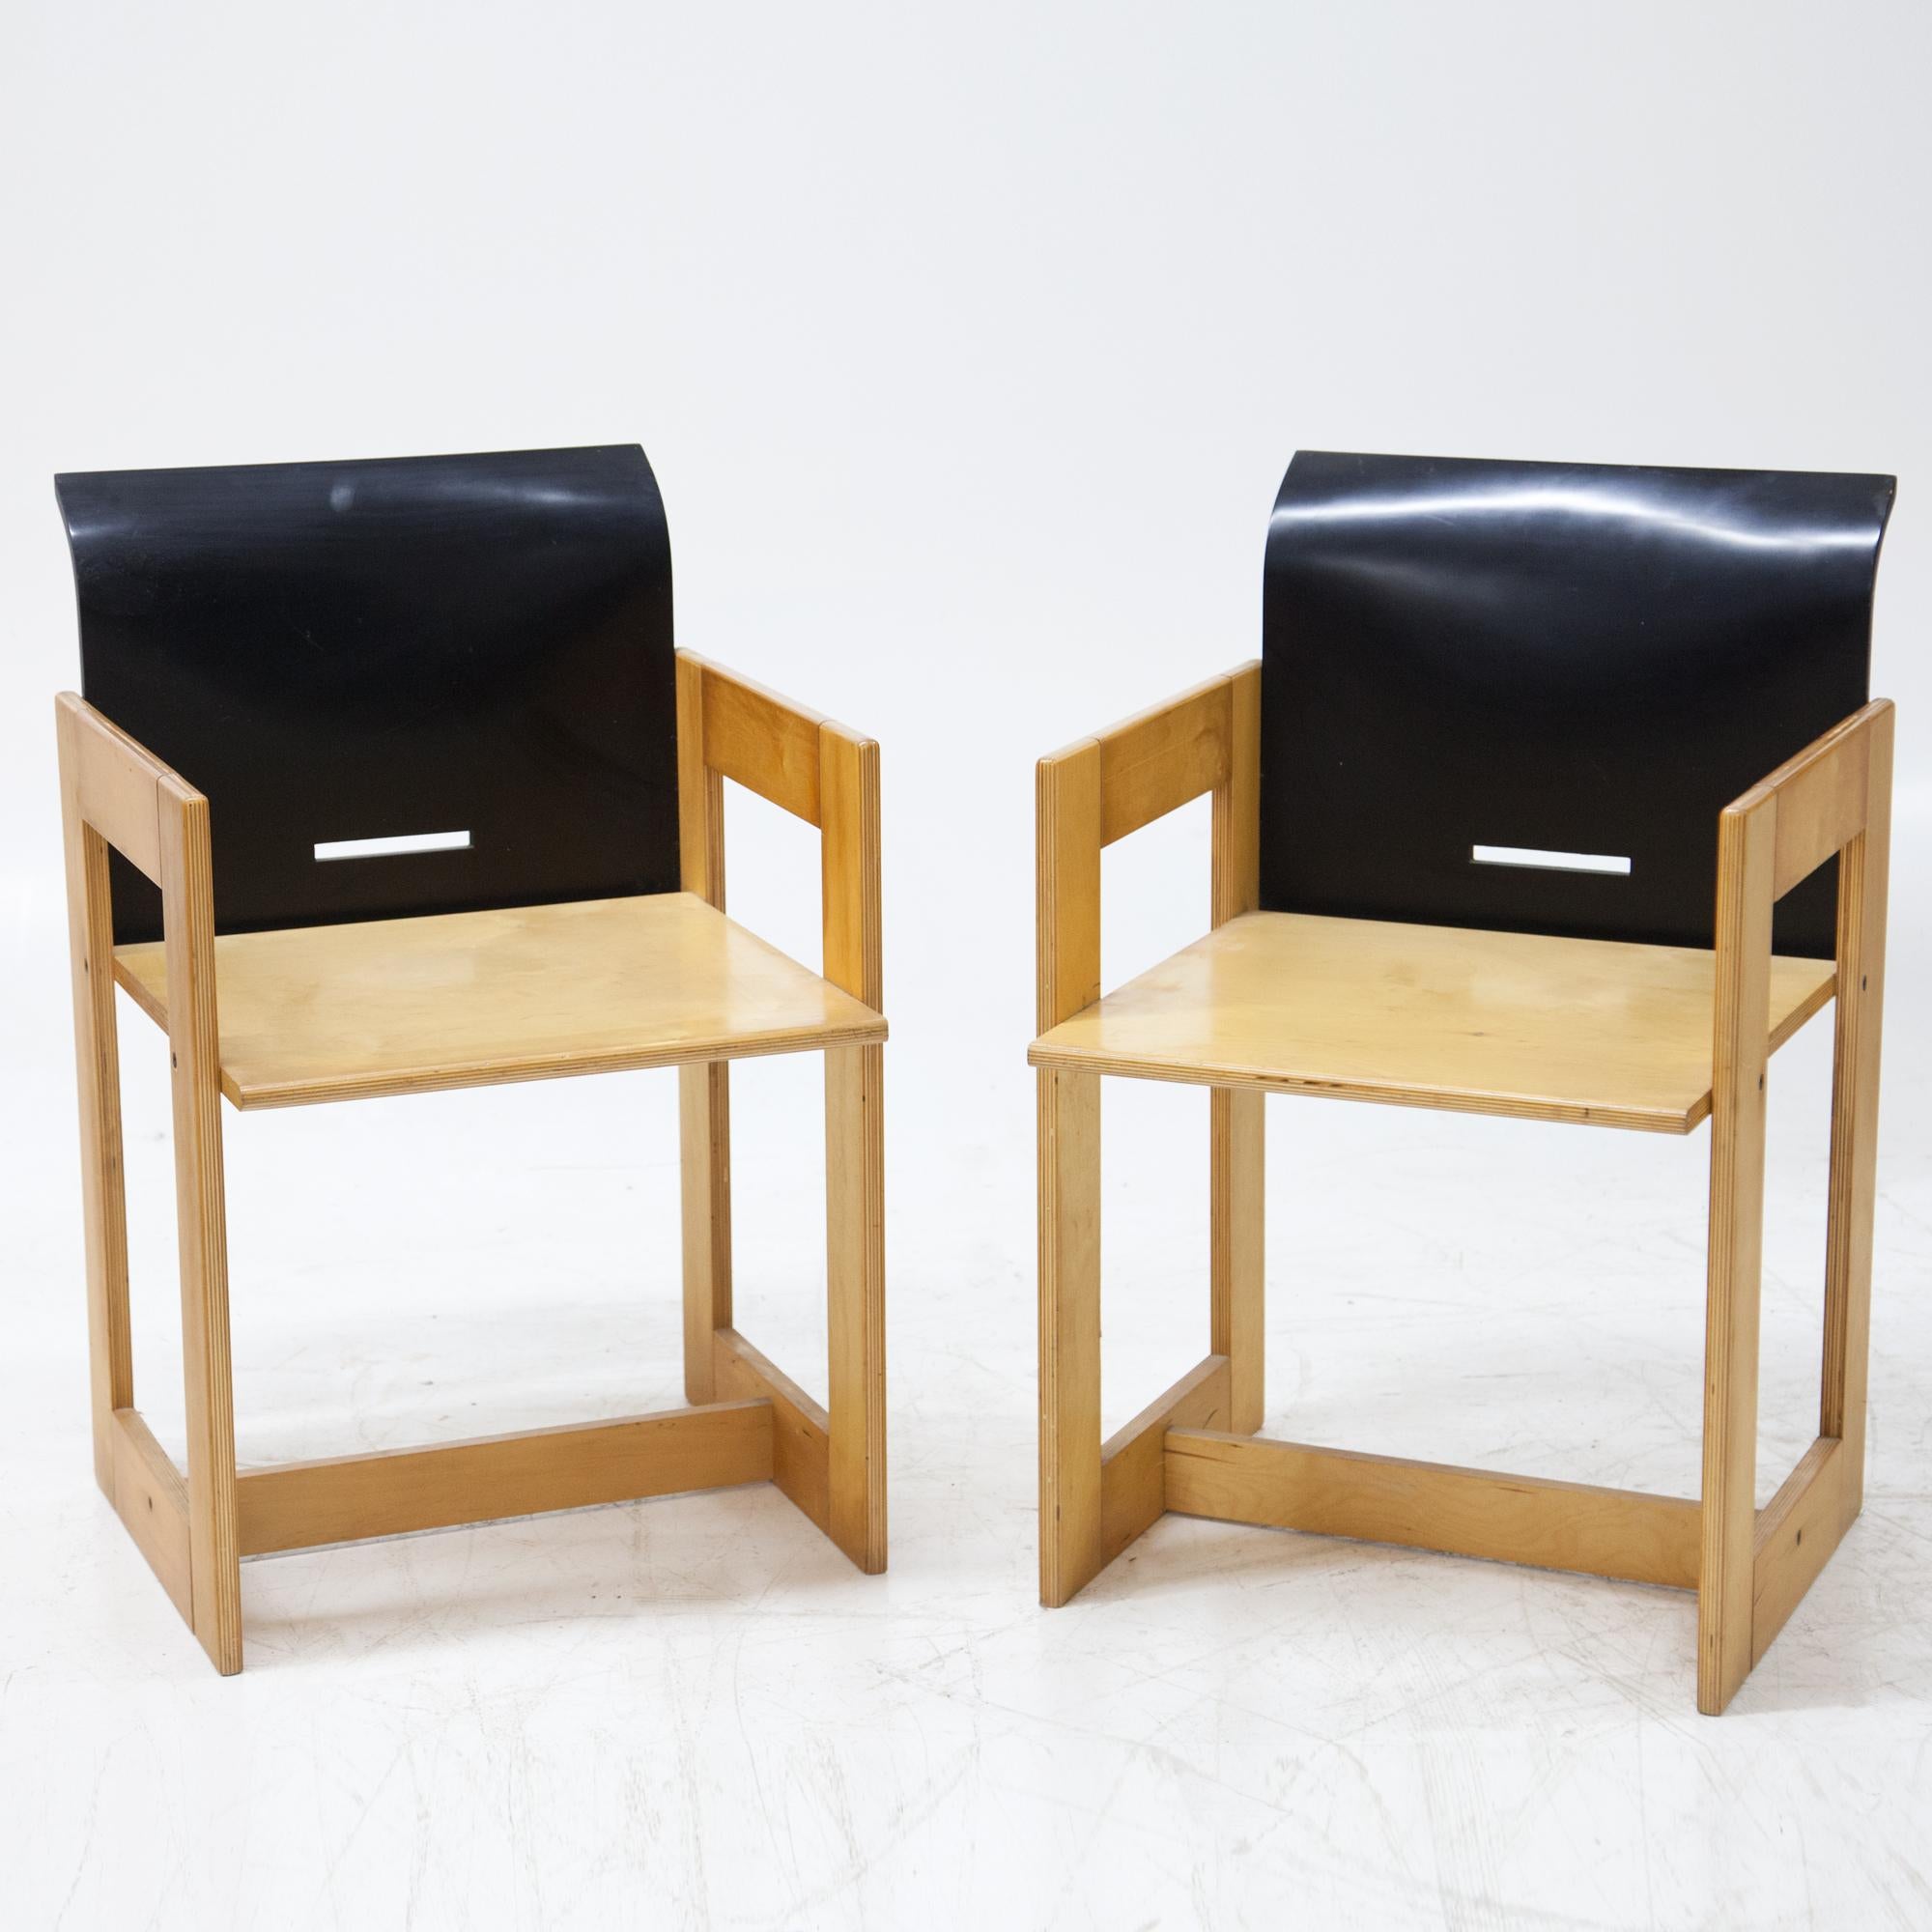 Pair of armchairs in plywood with black lacquered backrests and geometric base.